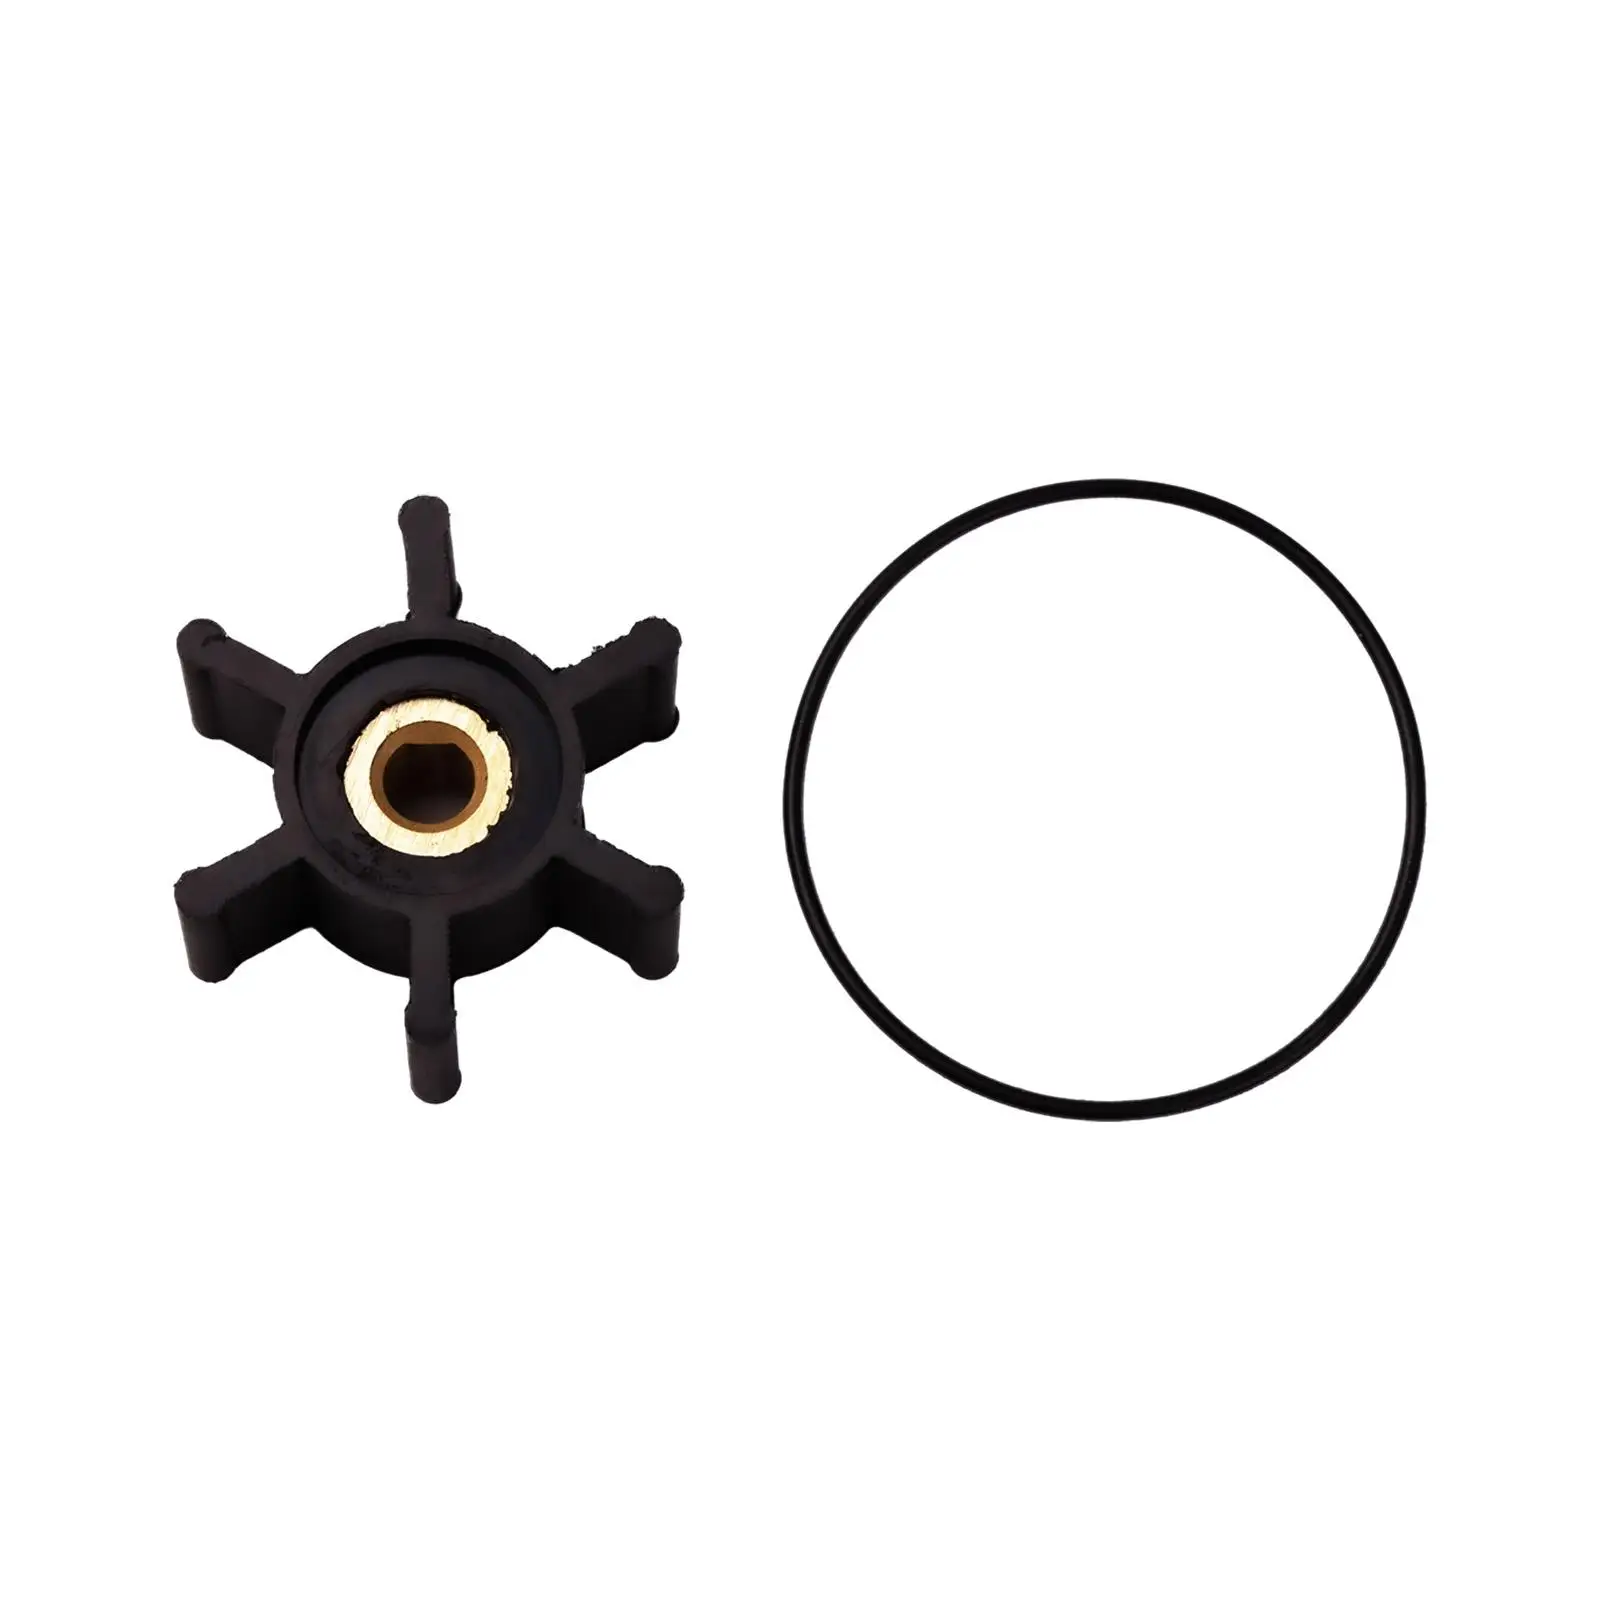 Black Impeller with O Ring Impeller with O Ring Kit 49-16-2771 for Milwaukee M18 Transfer Pumps Spare Parts Direct Replaces